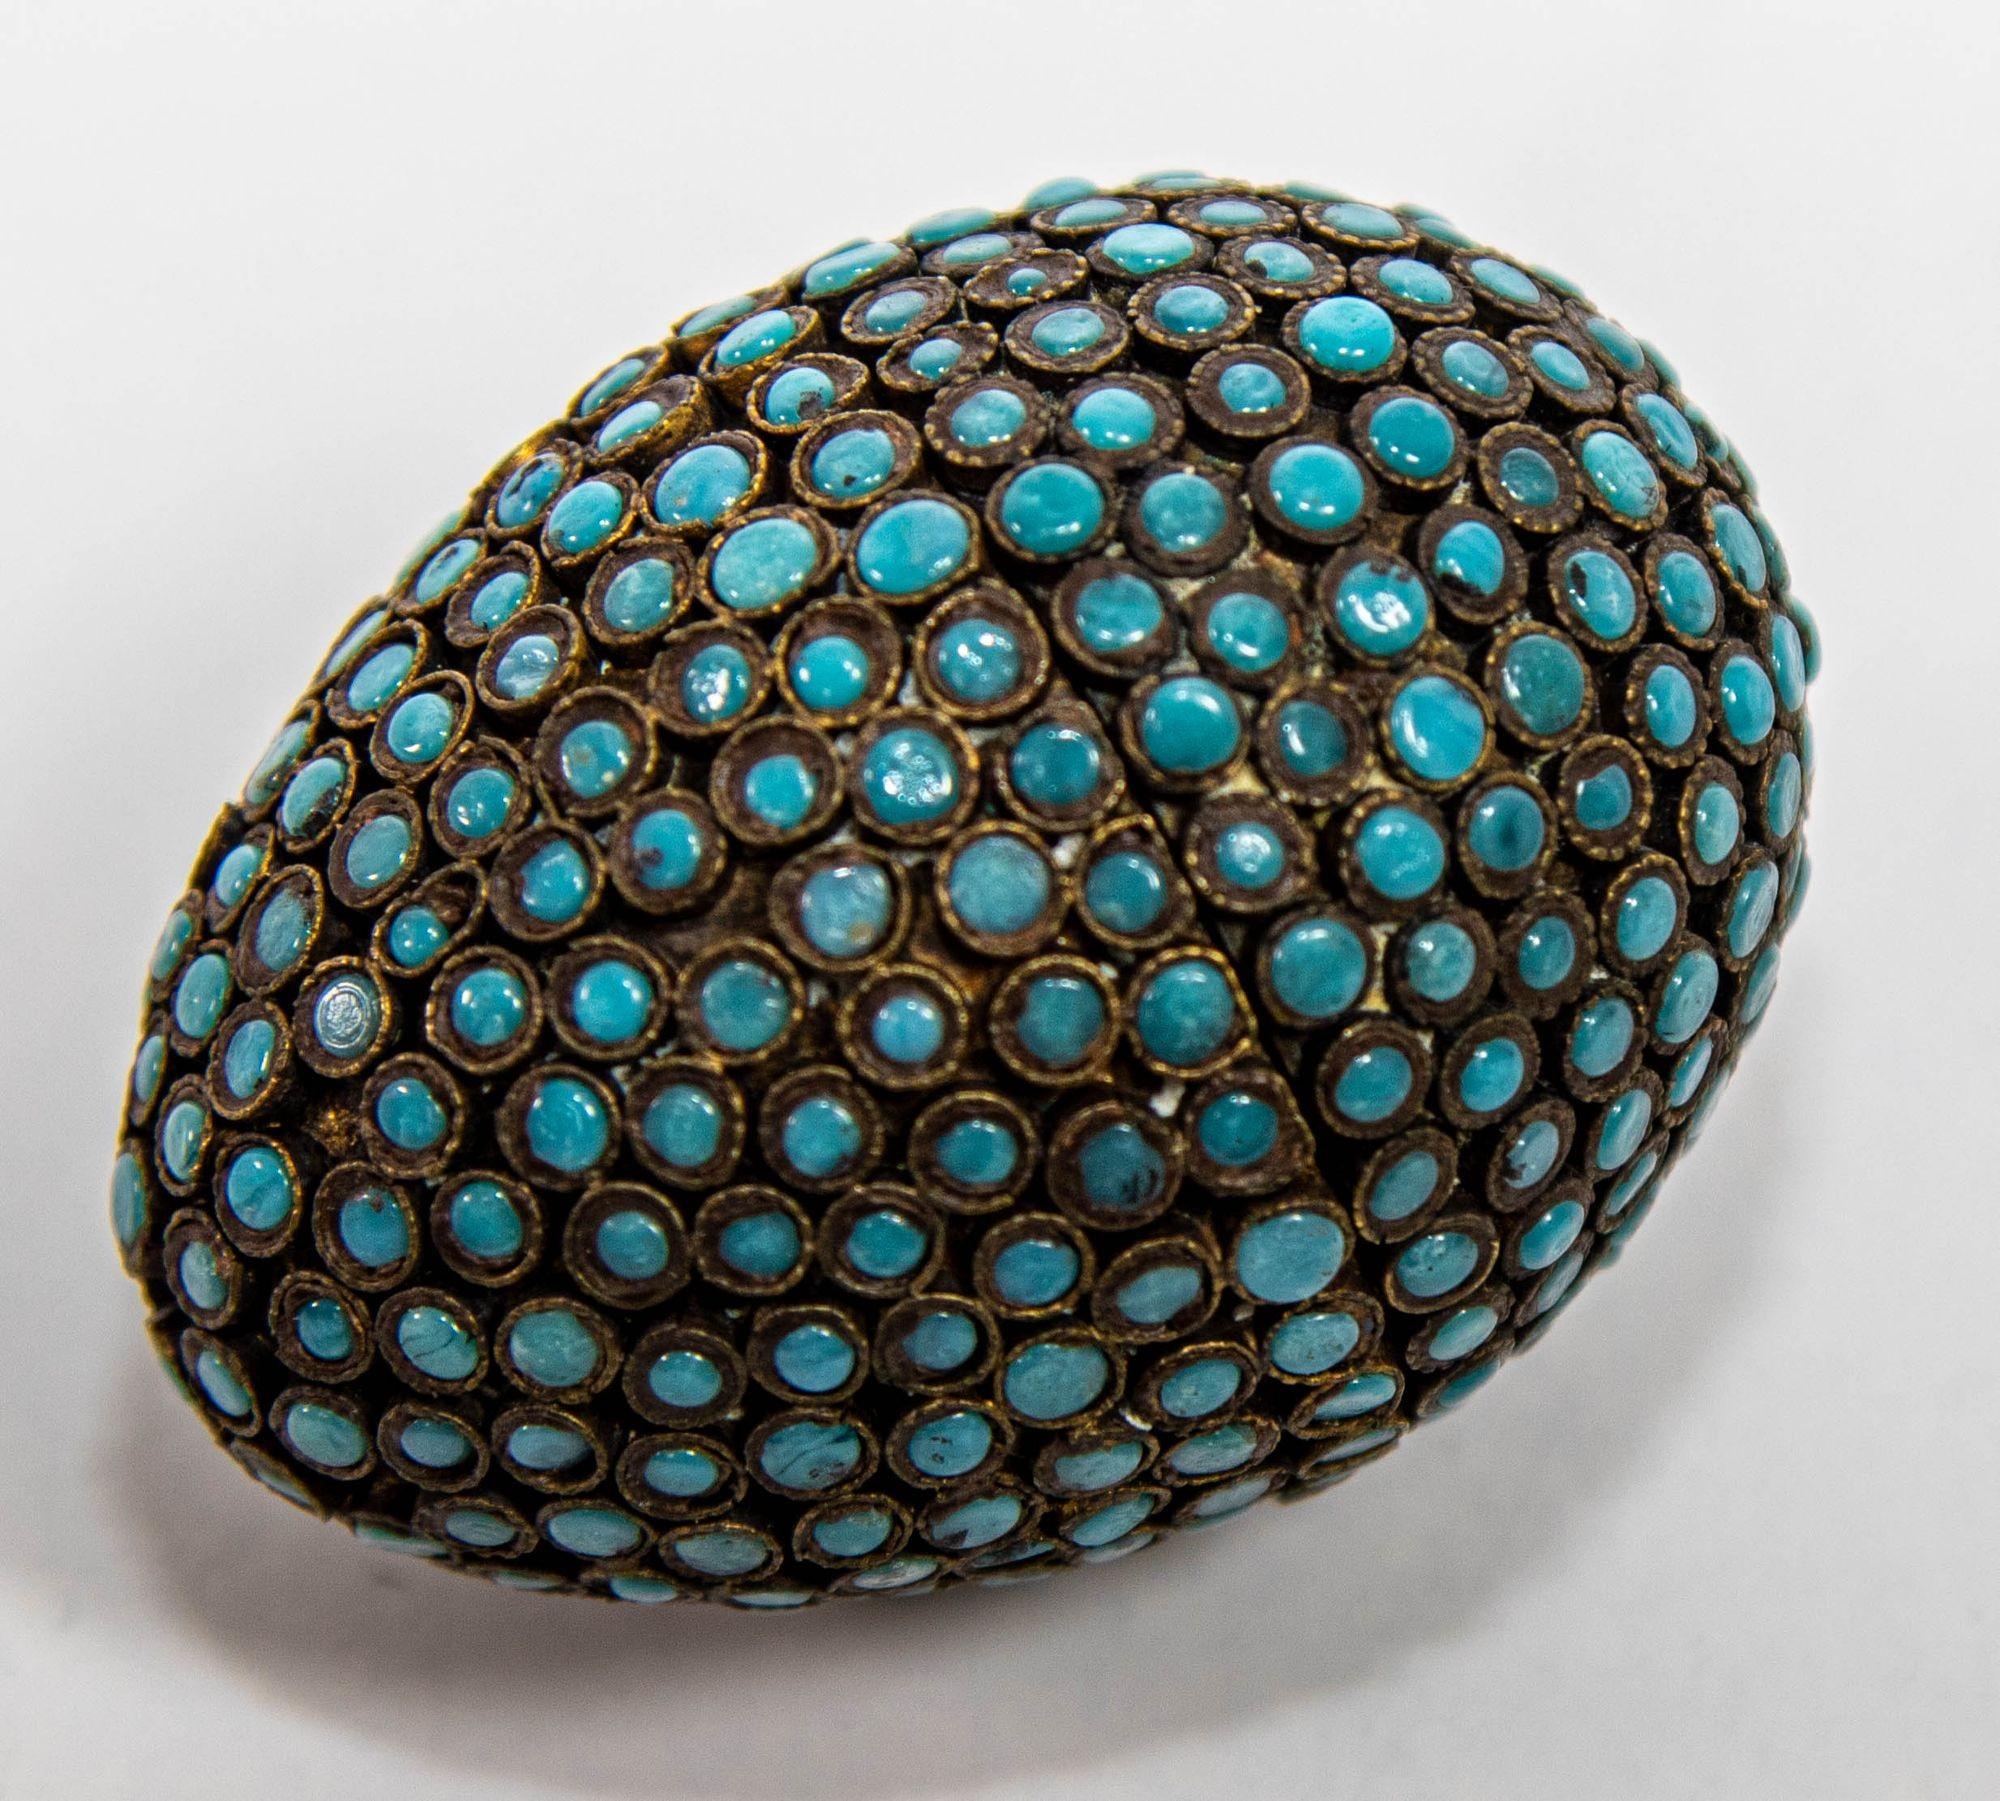 Antique Tibetan Nepal Egg Shaped Box with Gilt Interior and Turquoise Blue Stone Inlay.
Antique Chinese Tibetan brass filigree with turquoise beads egg shaped prayer wish box.
Handcrafted Asian Tibetan, Nepalese brass box inlaid with polished